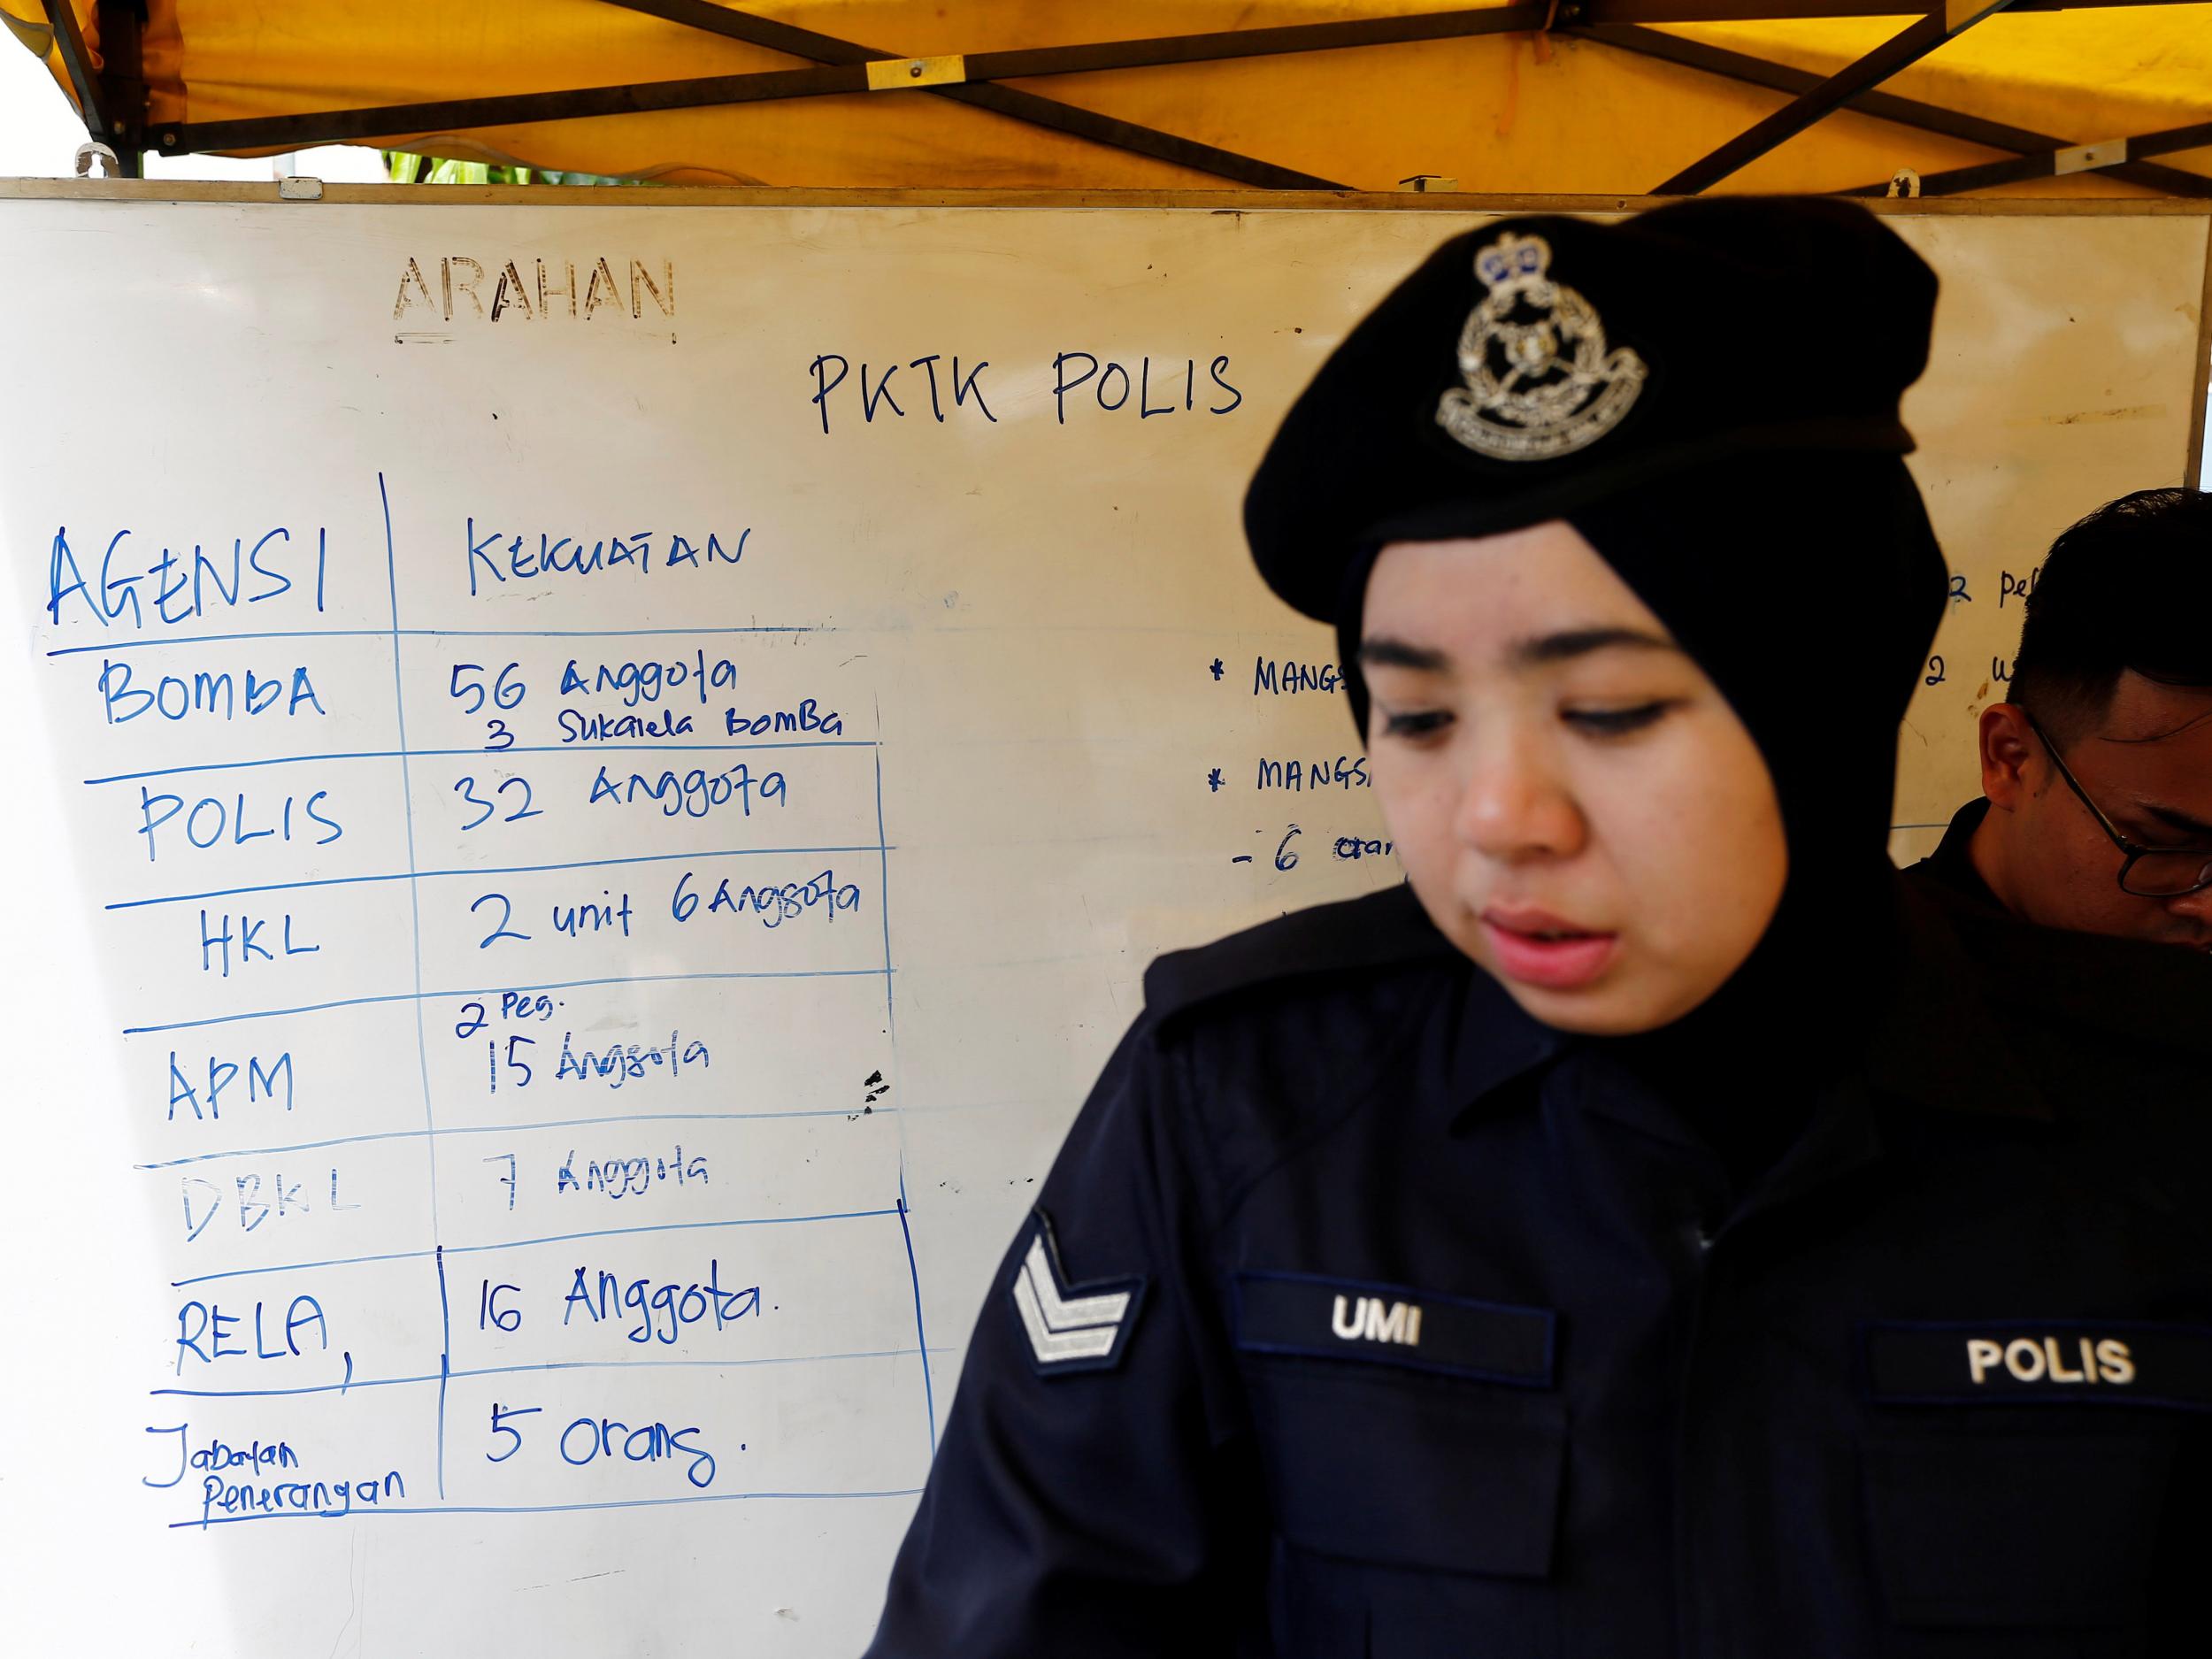 A policewoman stands next to a noticeboard accounting for manpower involved in the aftermath of the fire